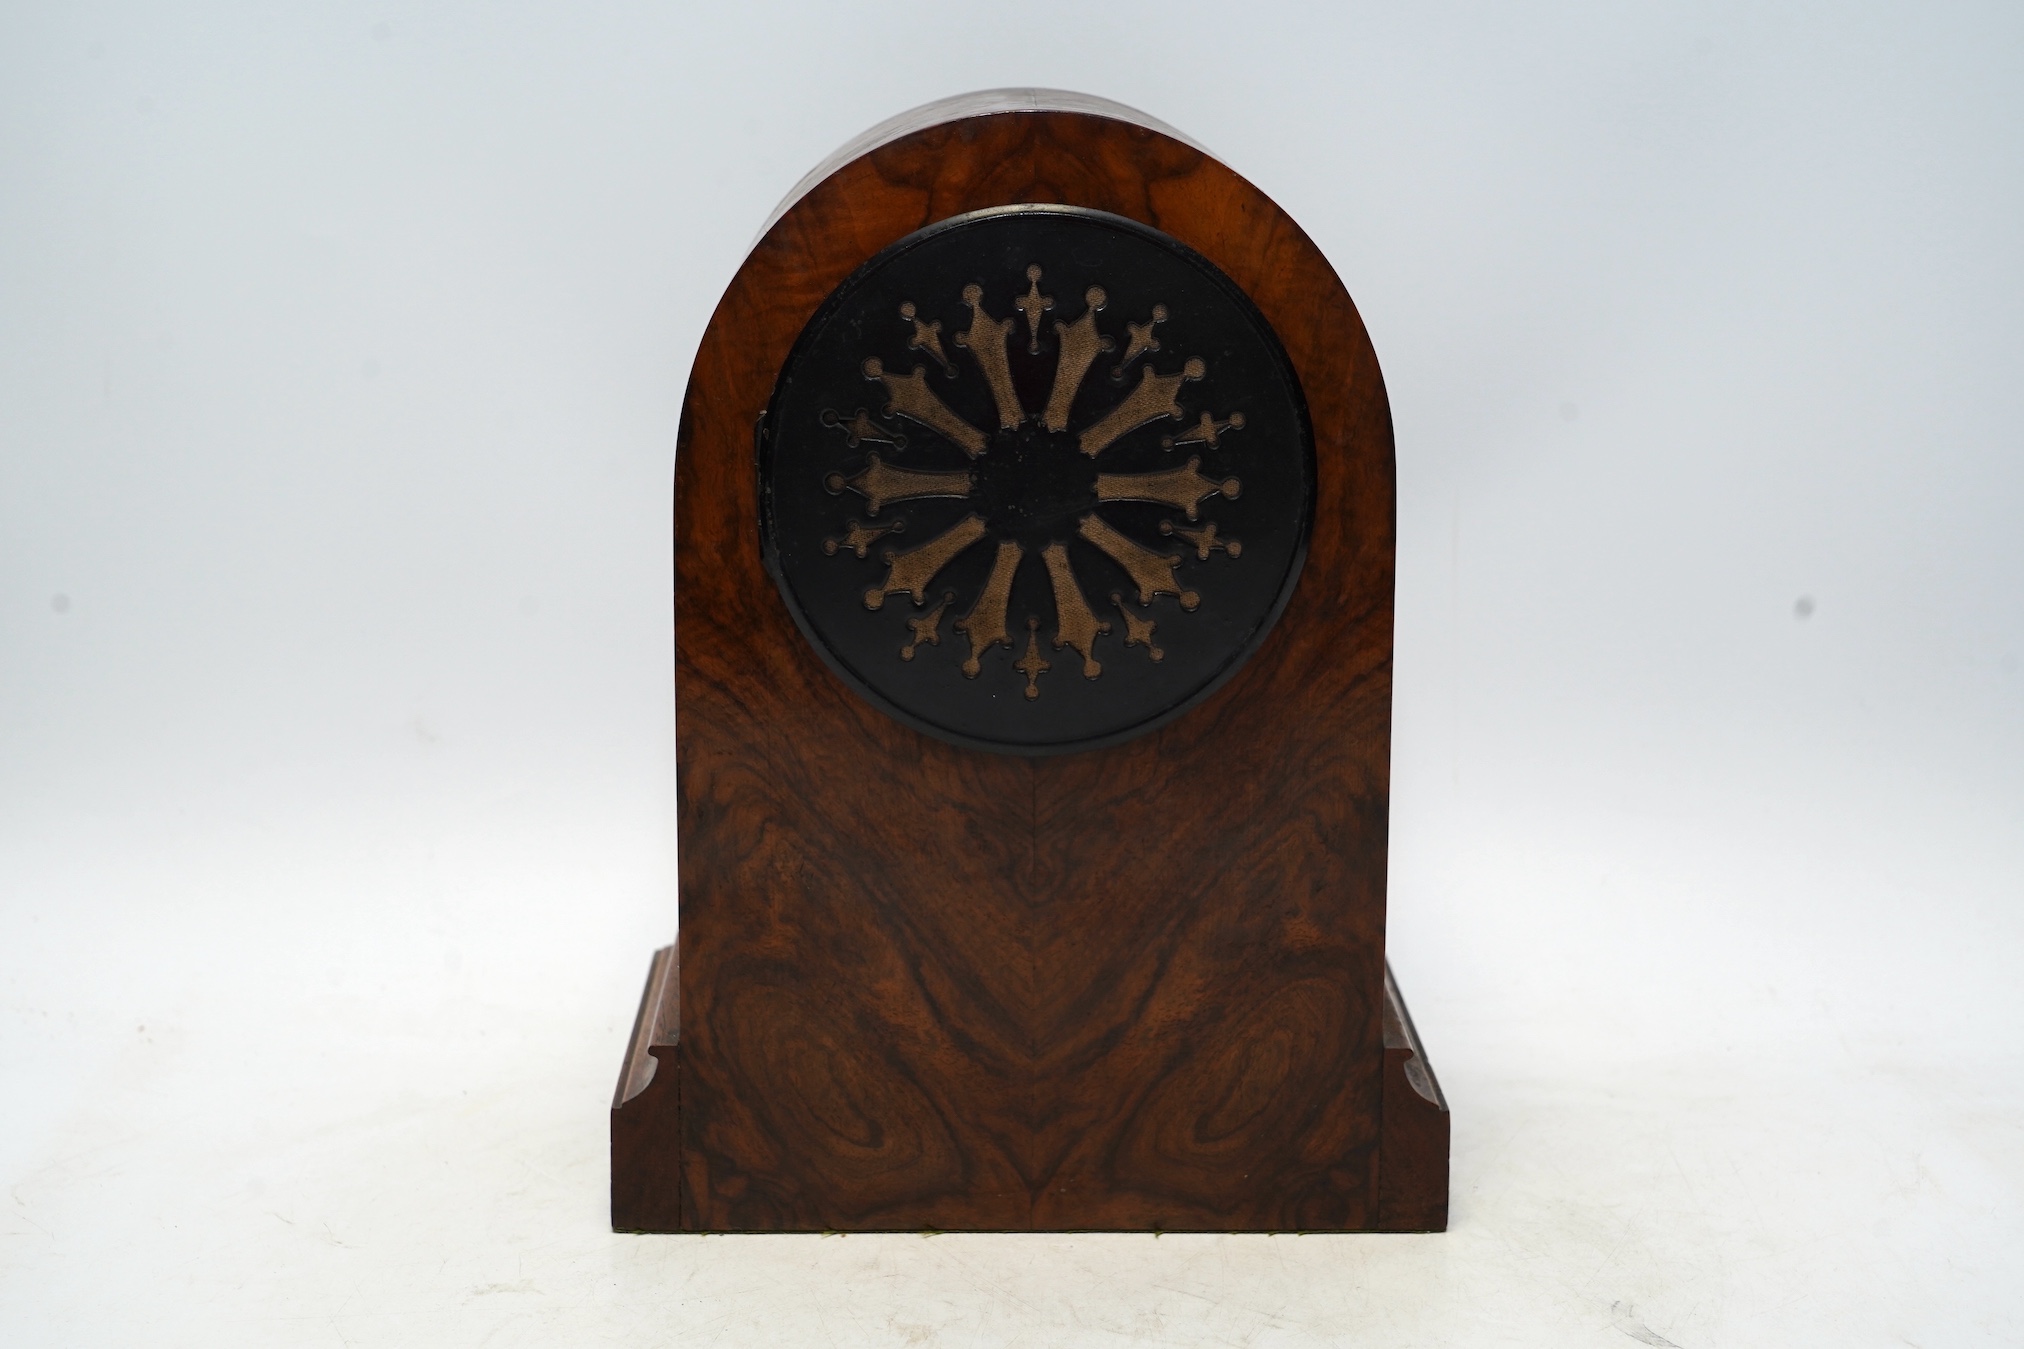 An Edwardian mantel clock with Arabic dial and applied plaque, 25cm high. Condition - fair to good, some cracking to the wood